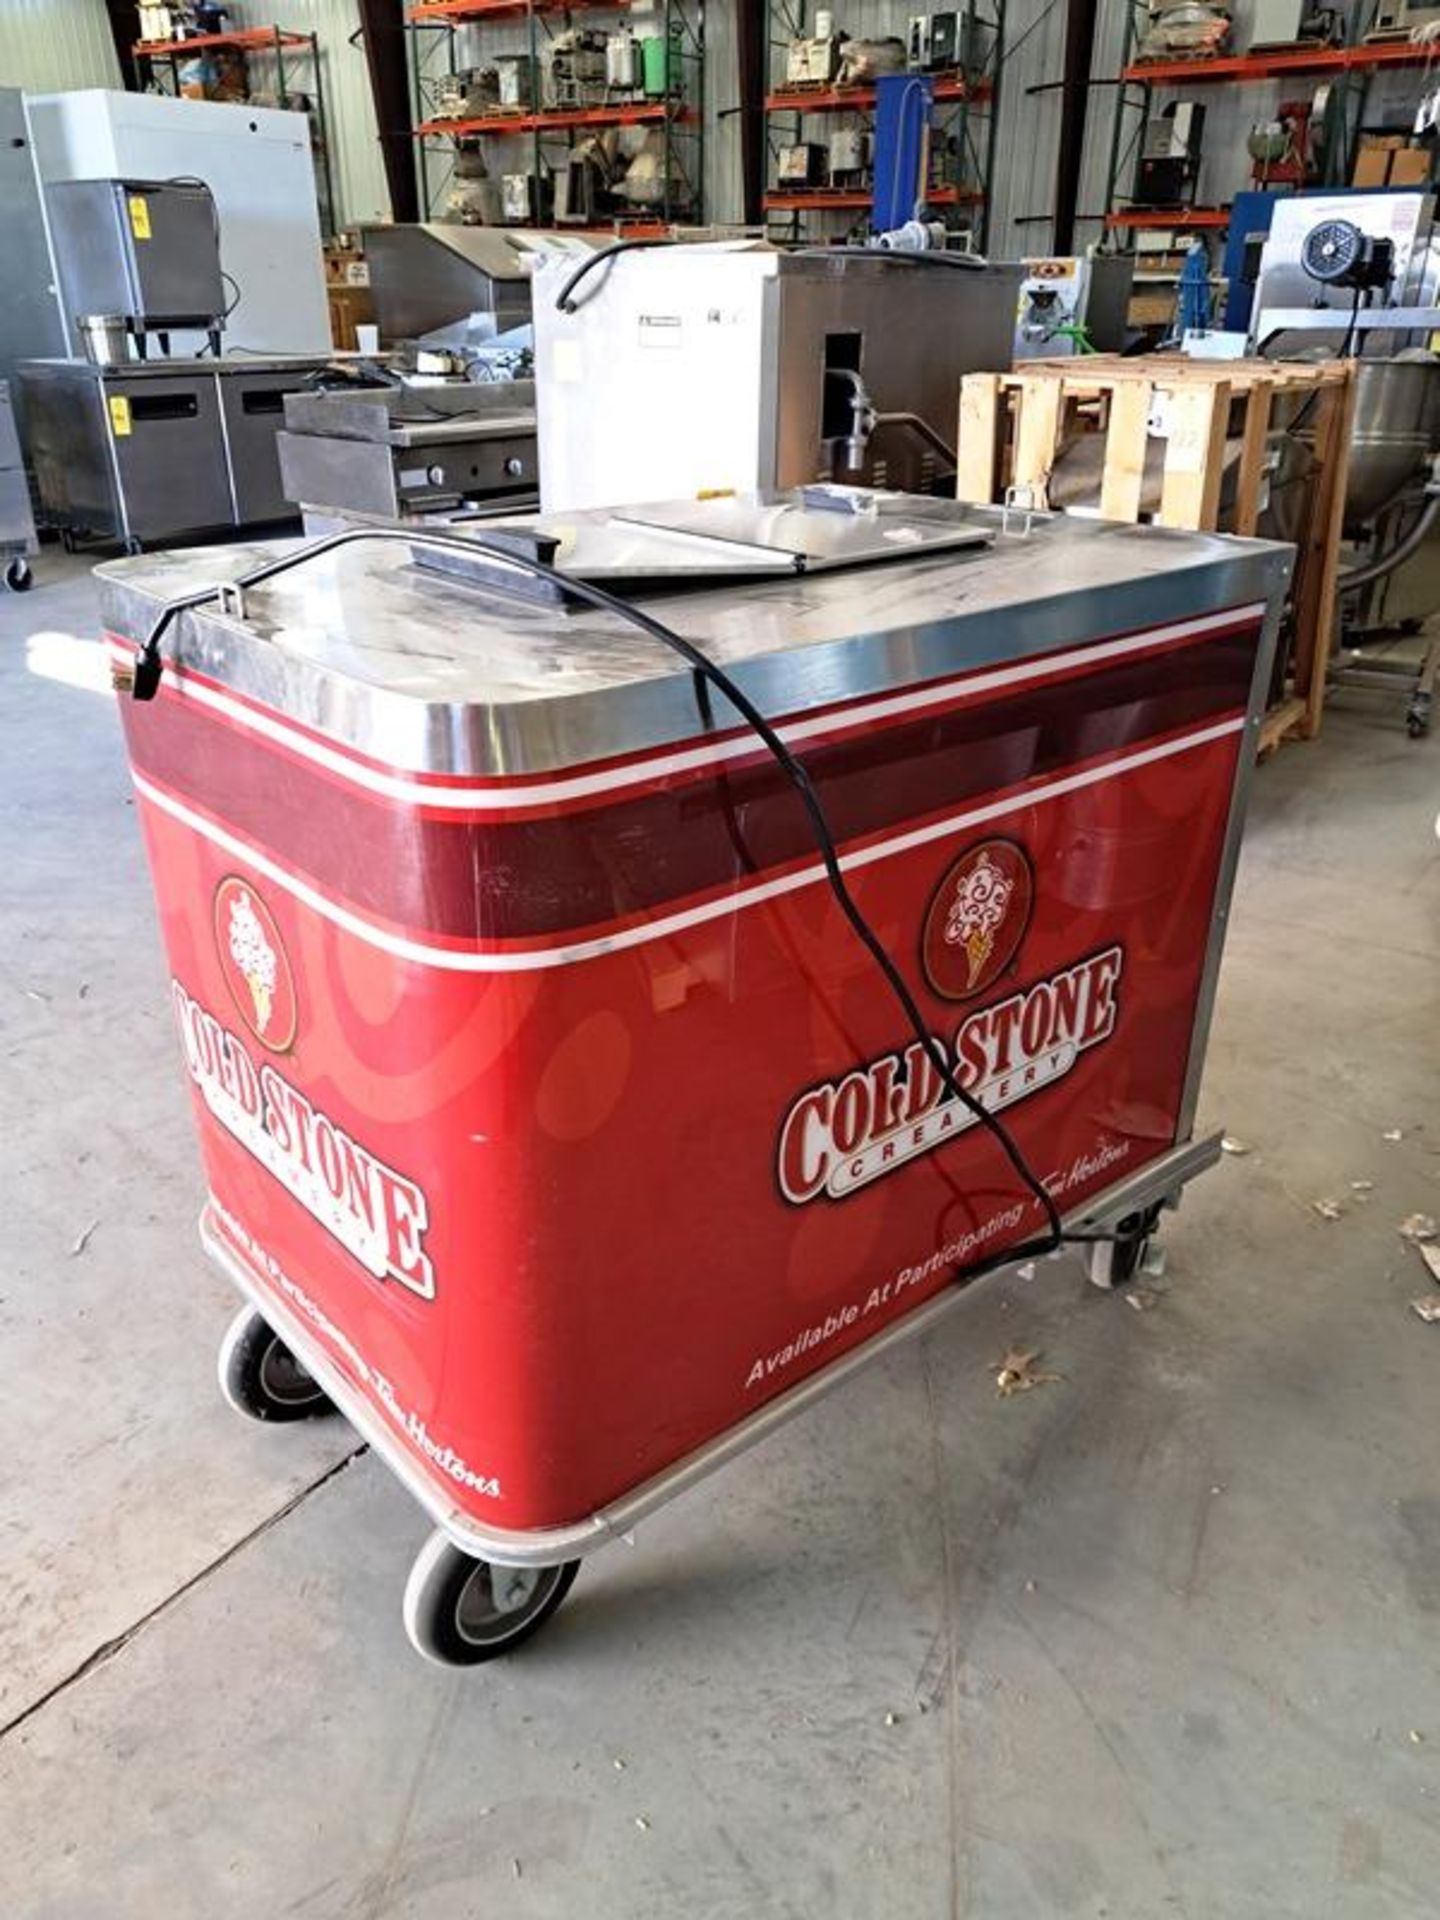 C.Nelson Mdl. BDC-85 Ice Cream/Frozen Dessert Freezer Cart with umbrella, 115 volts (Required - Image 2 of 4